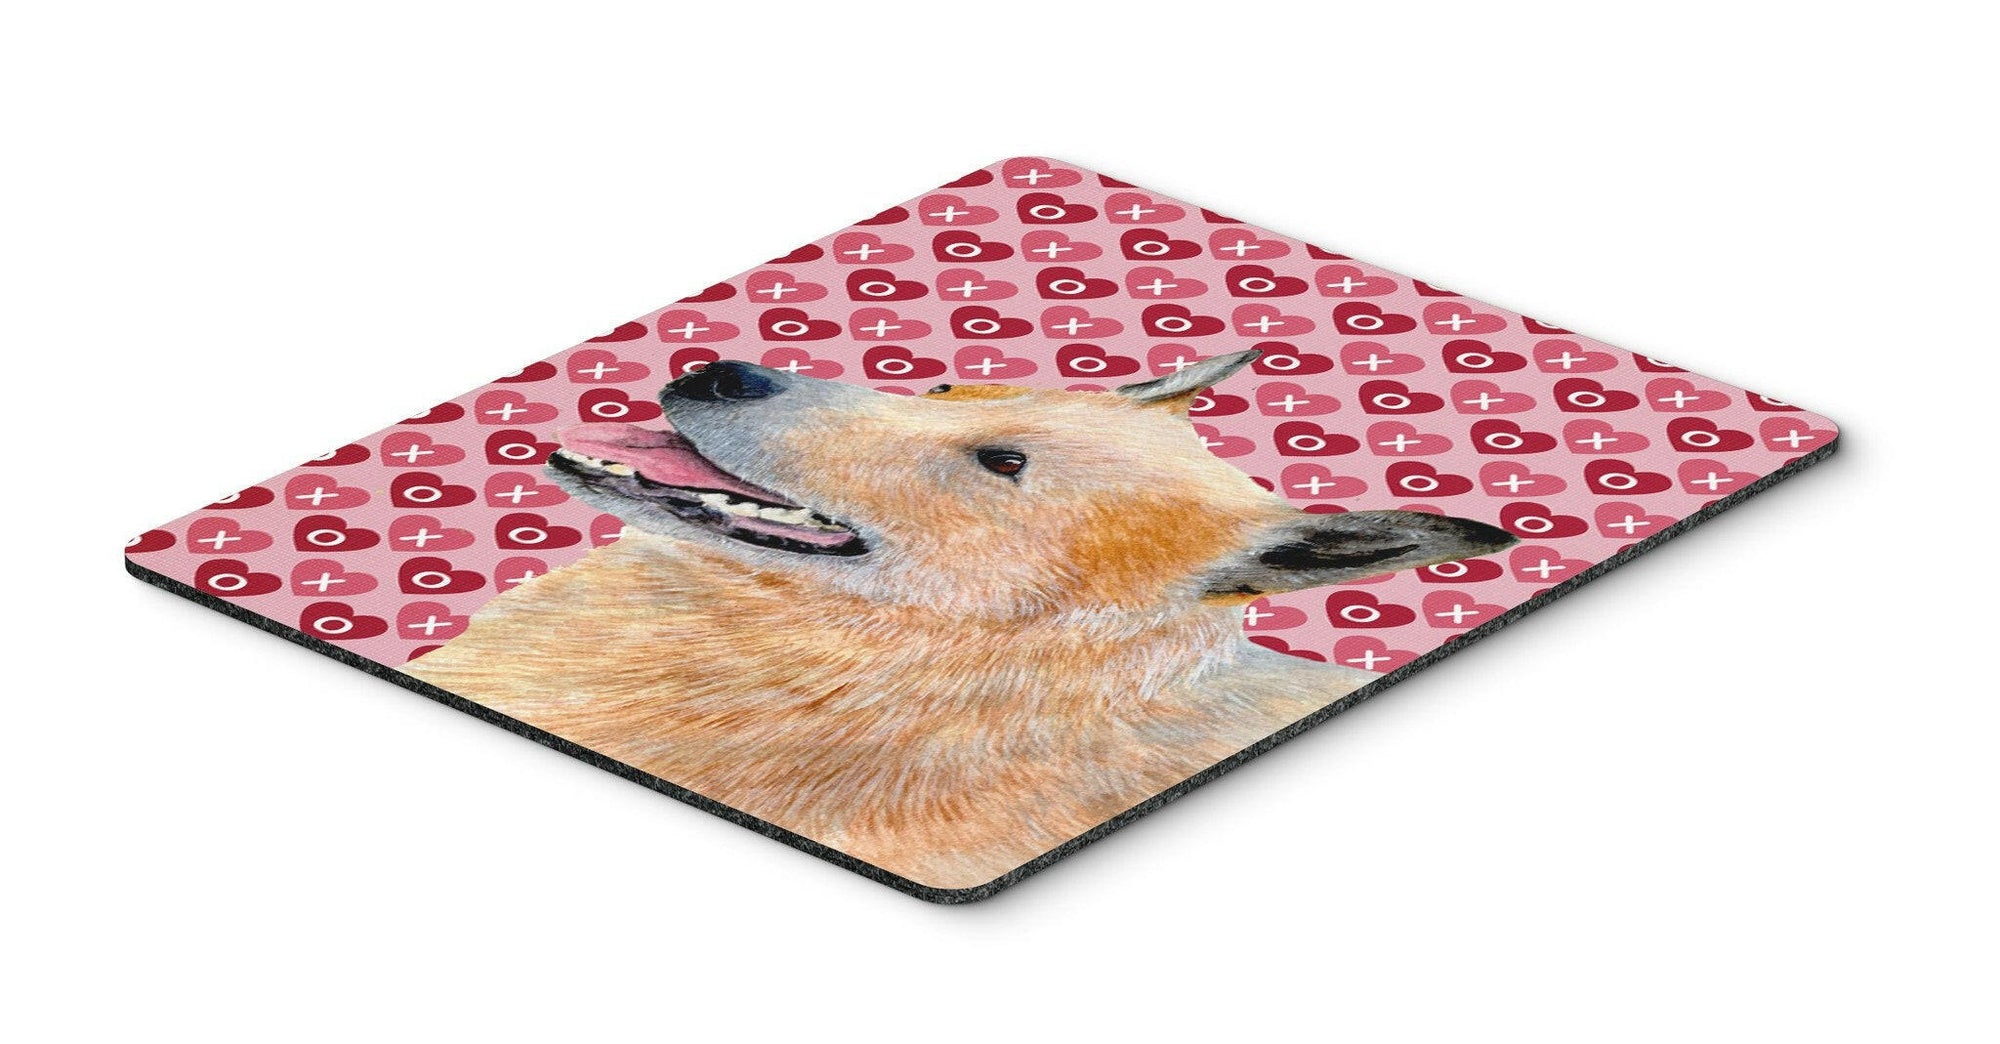 Australian Cattle Dog Hearts Love and Valentine's Day Mouse Pad, Hot Pad Trivet by Caroline's Treasures